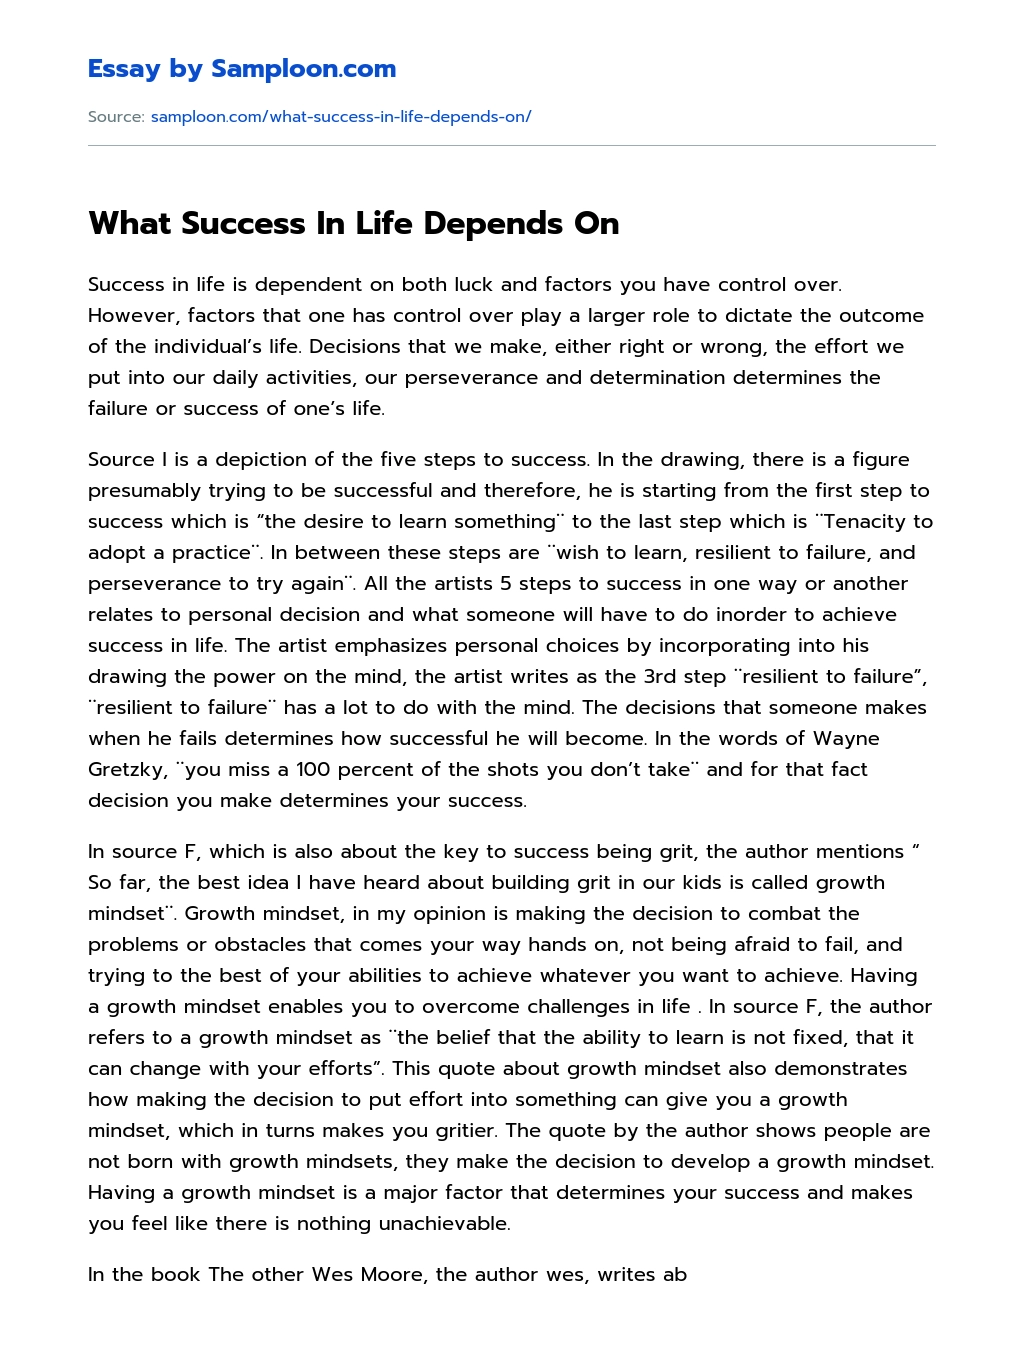 What Success In Life Depends On essay